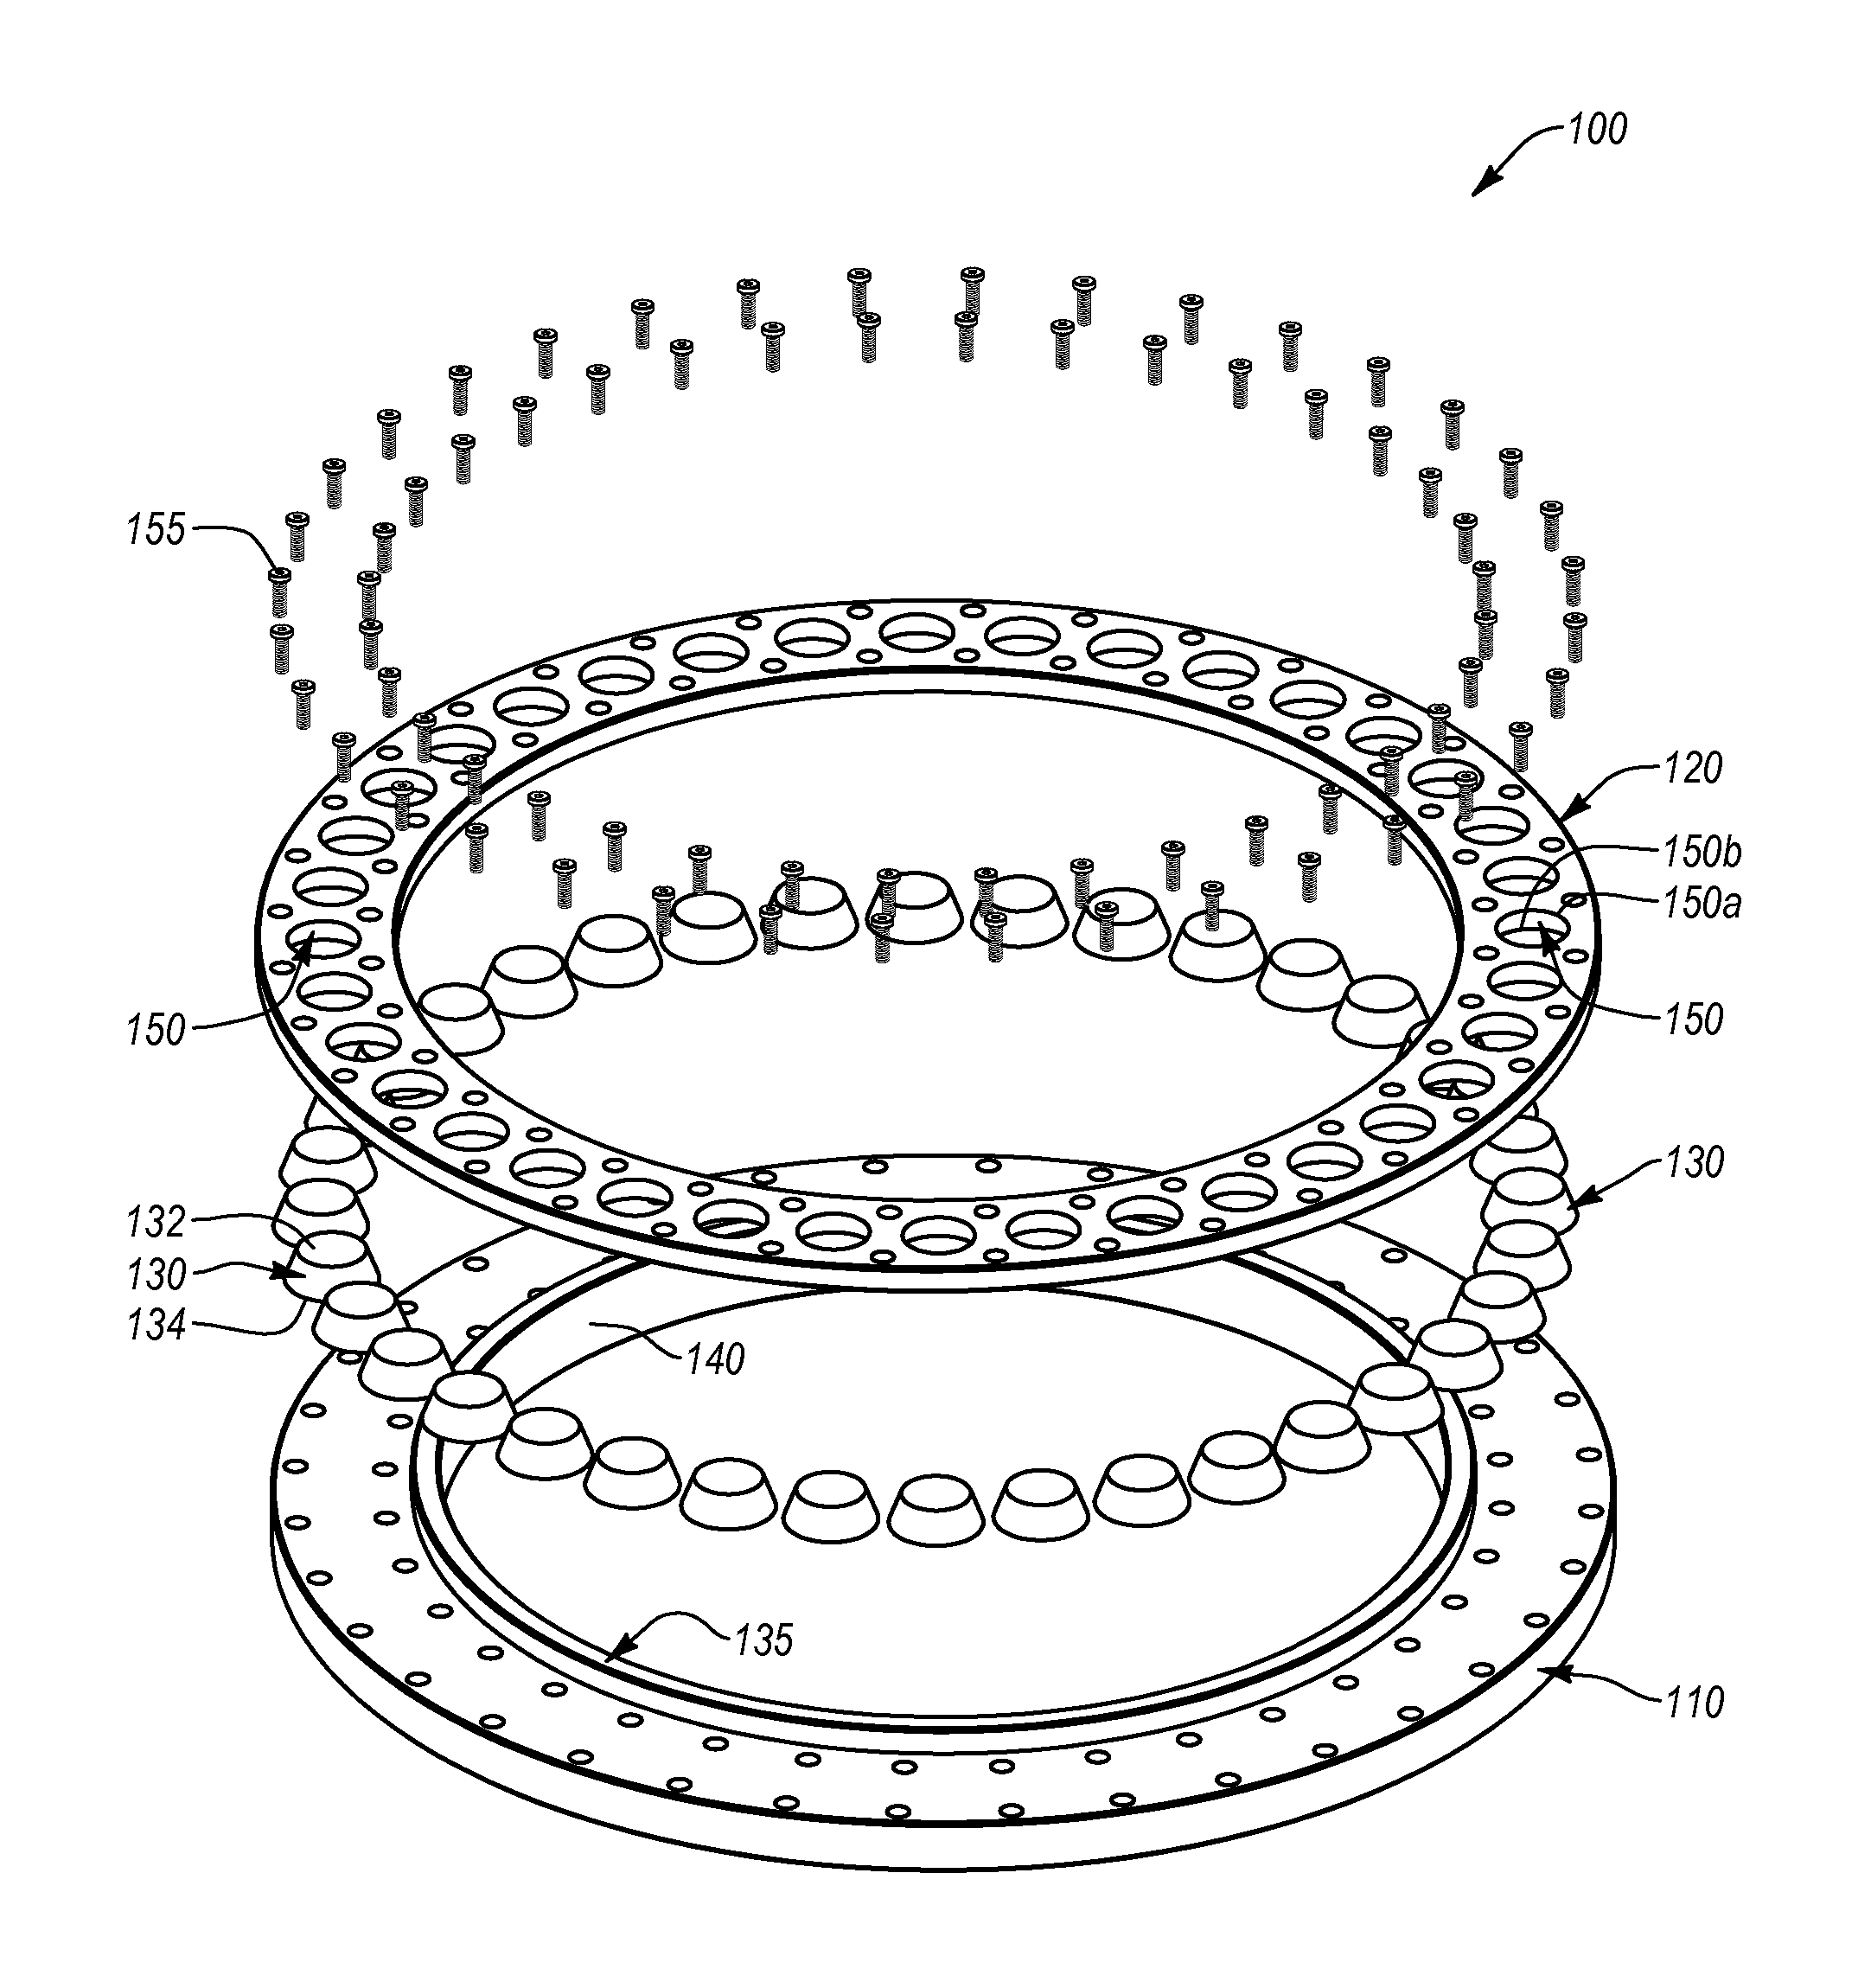 Bearing Assemblies, Bearing Apparatuses Using the Same, and Related Methods